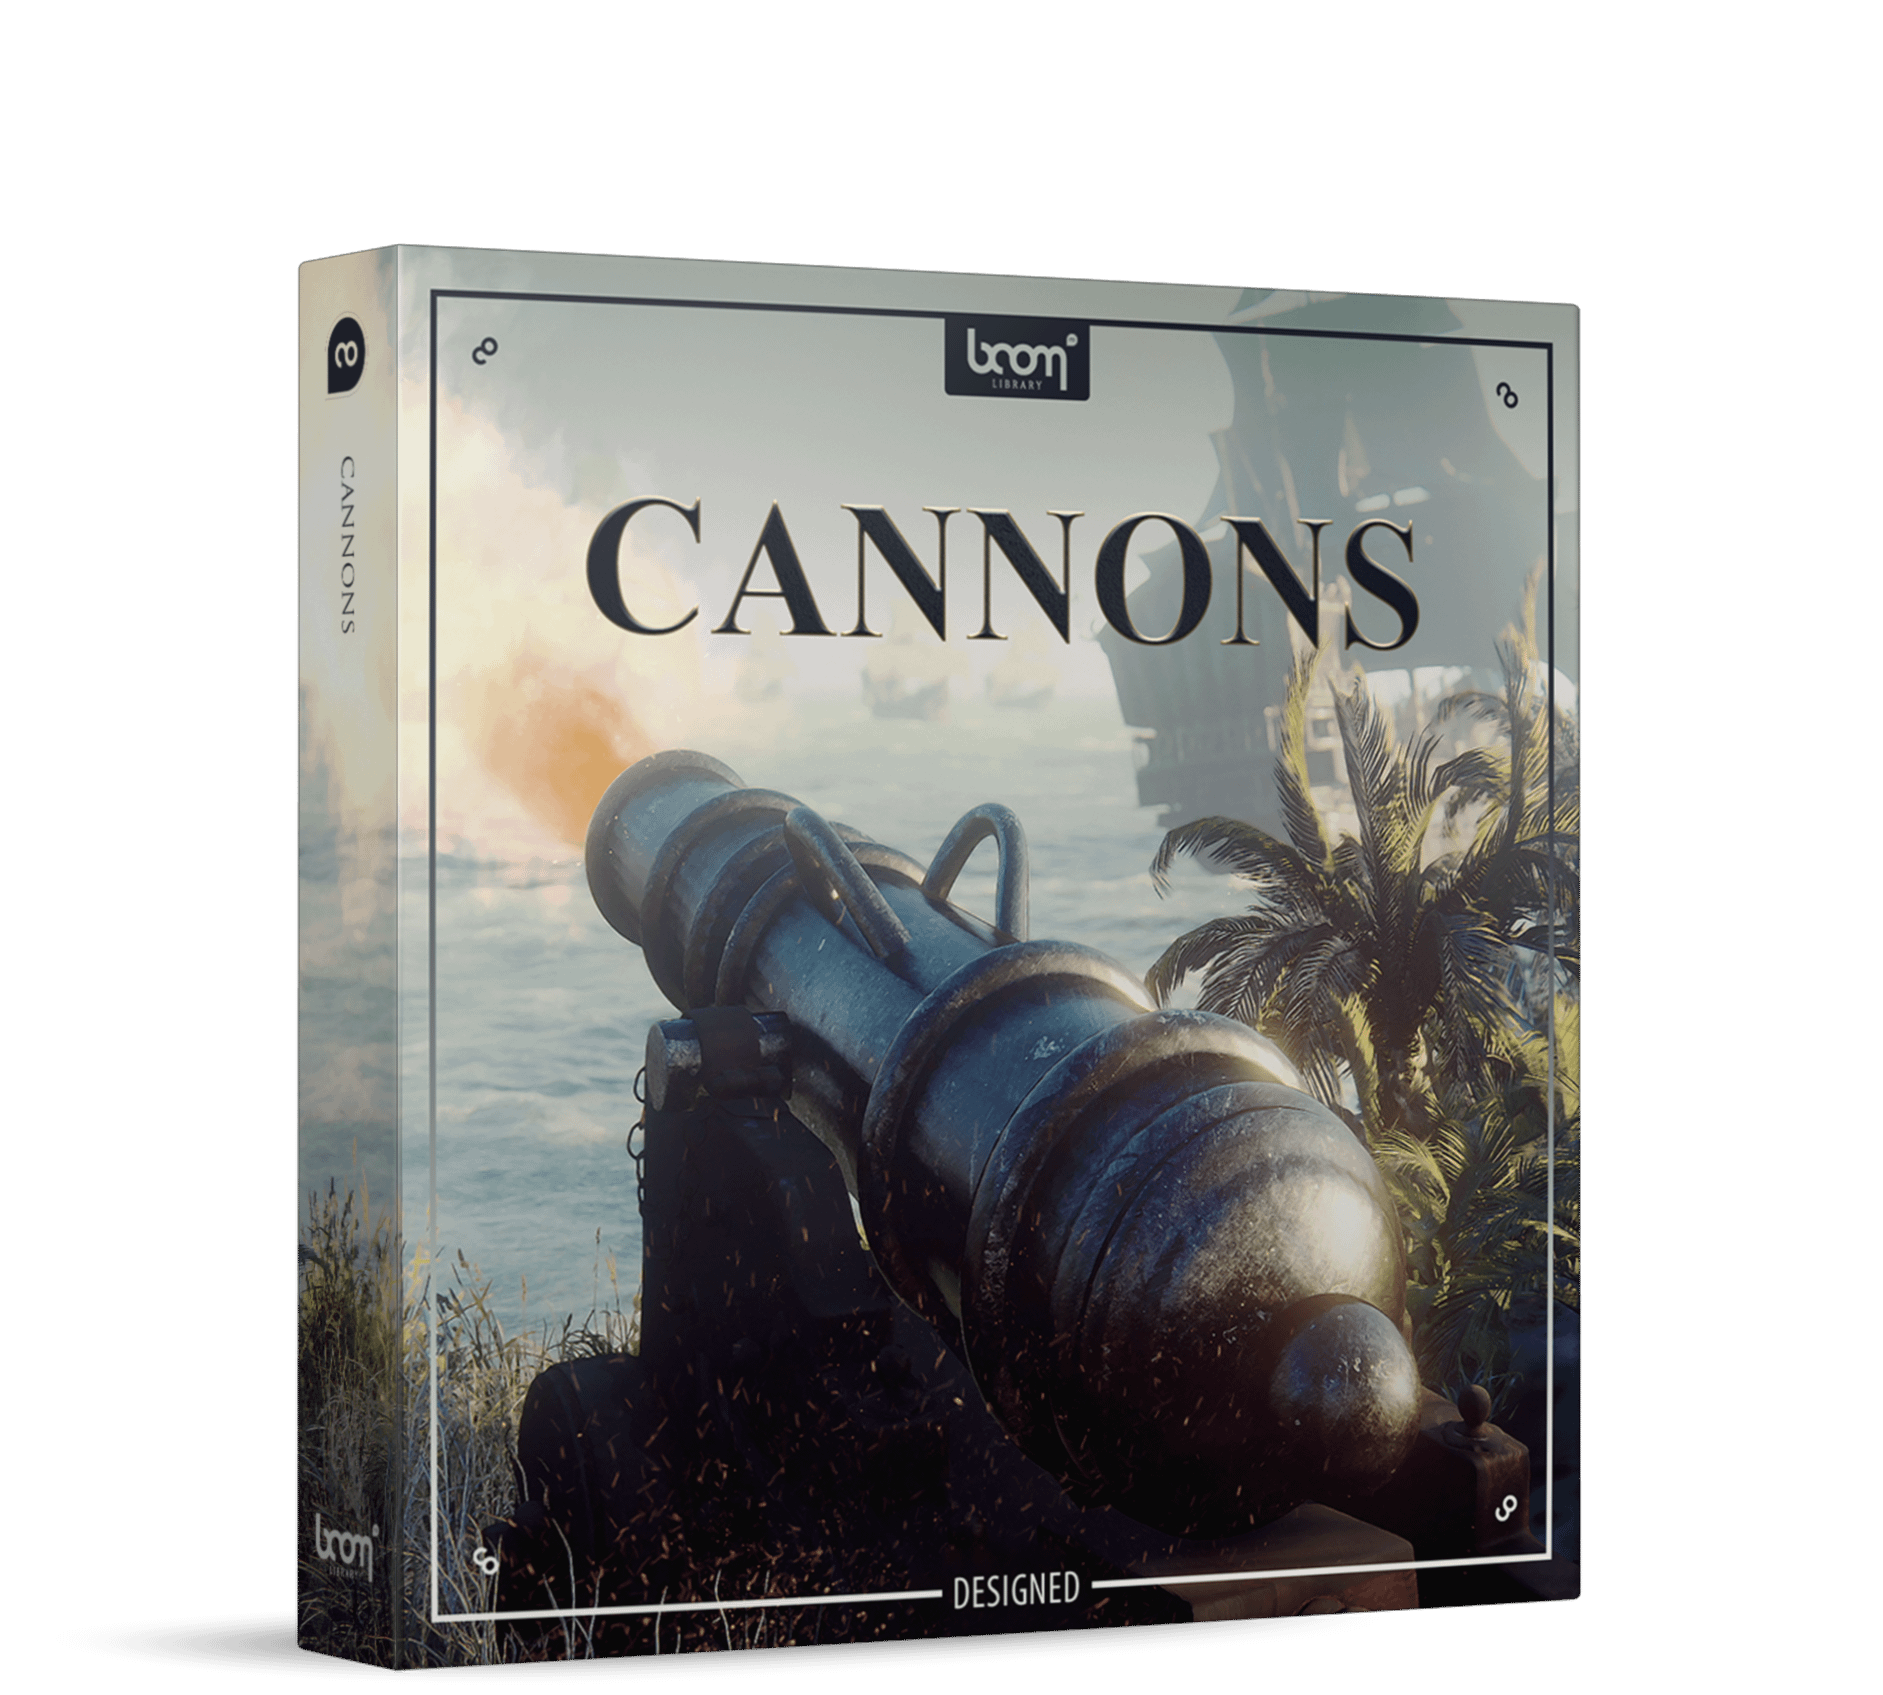 Cannons | Cannon Sound Effects Library | Asoundeffect.com